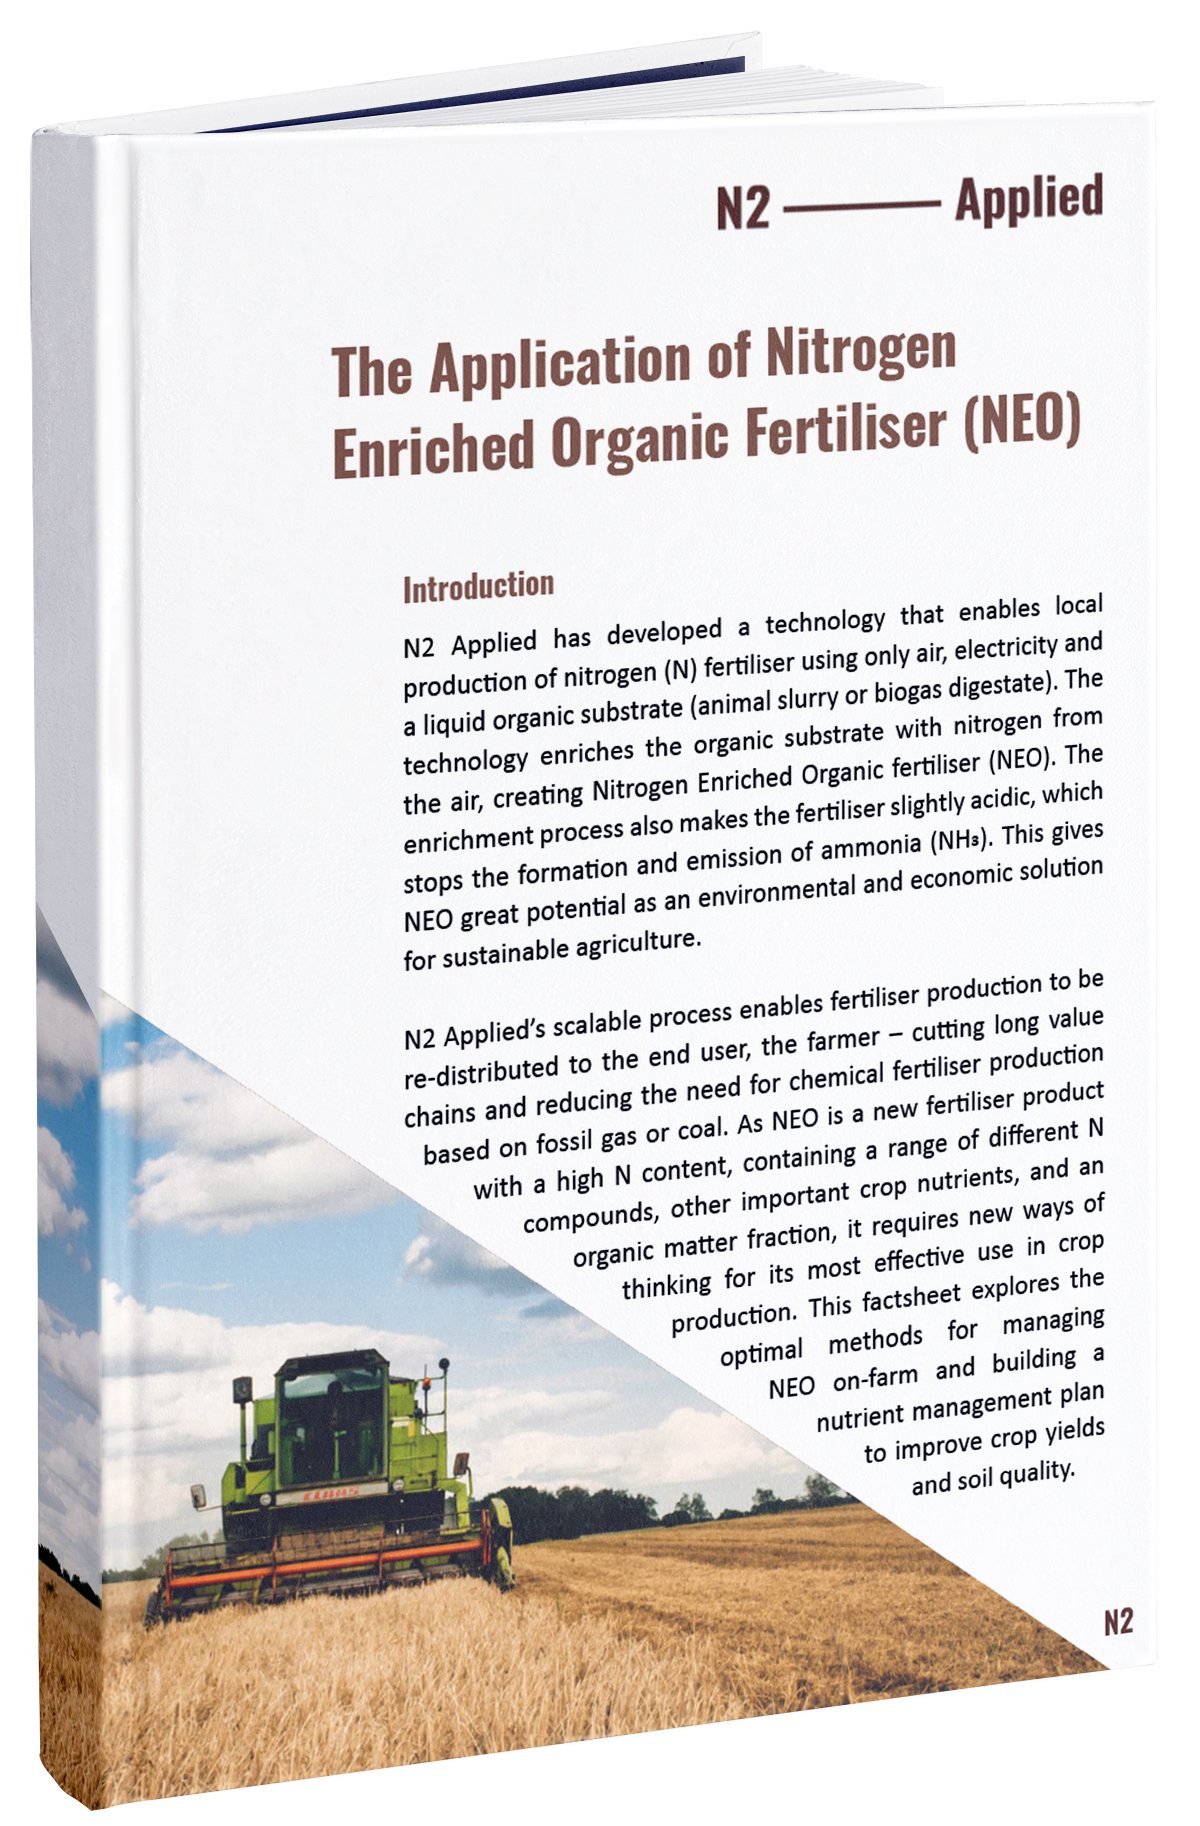 Cover of ebook about the application of nitrogen enriched organic fertiliser (NEO).